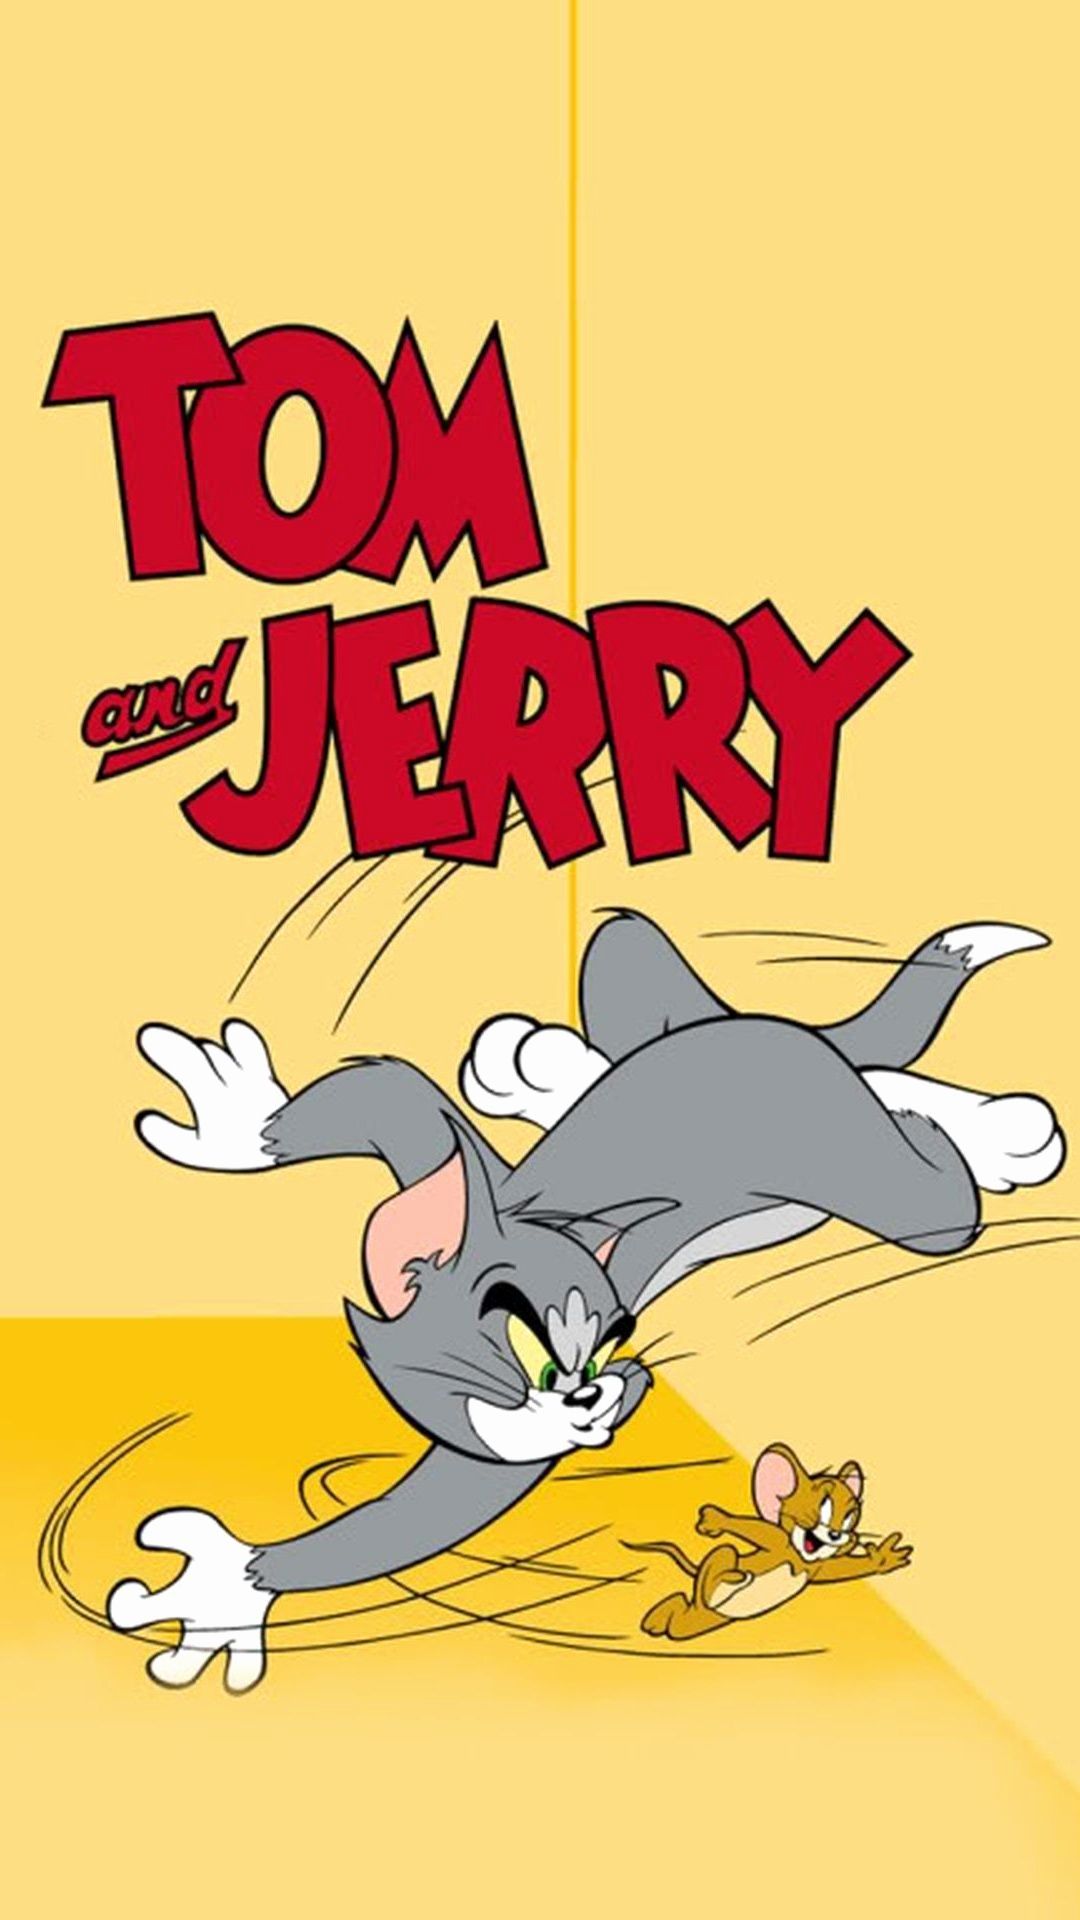 90s Wallpaper New tom and Jerry iPhone .lefthudson.com